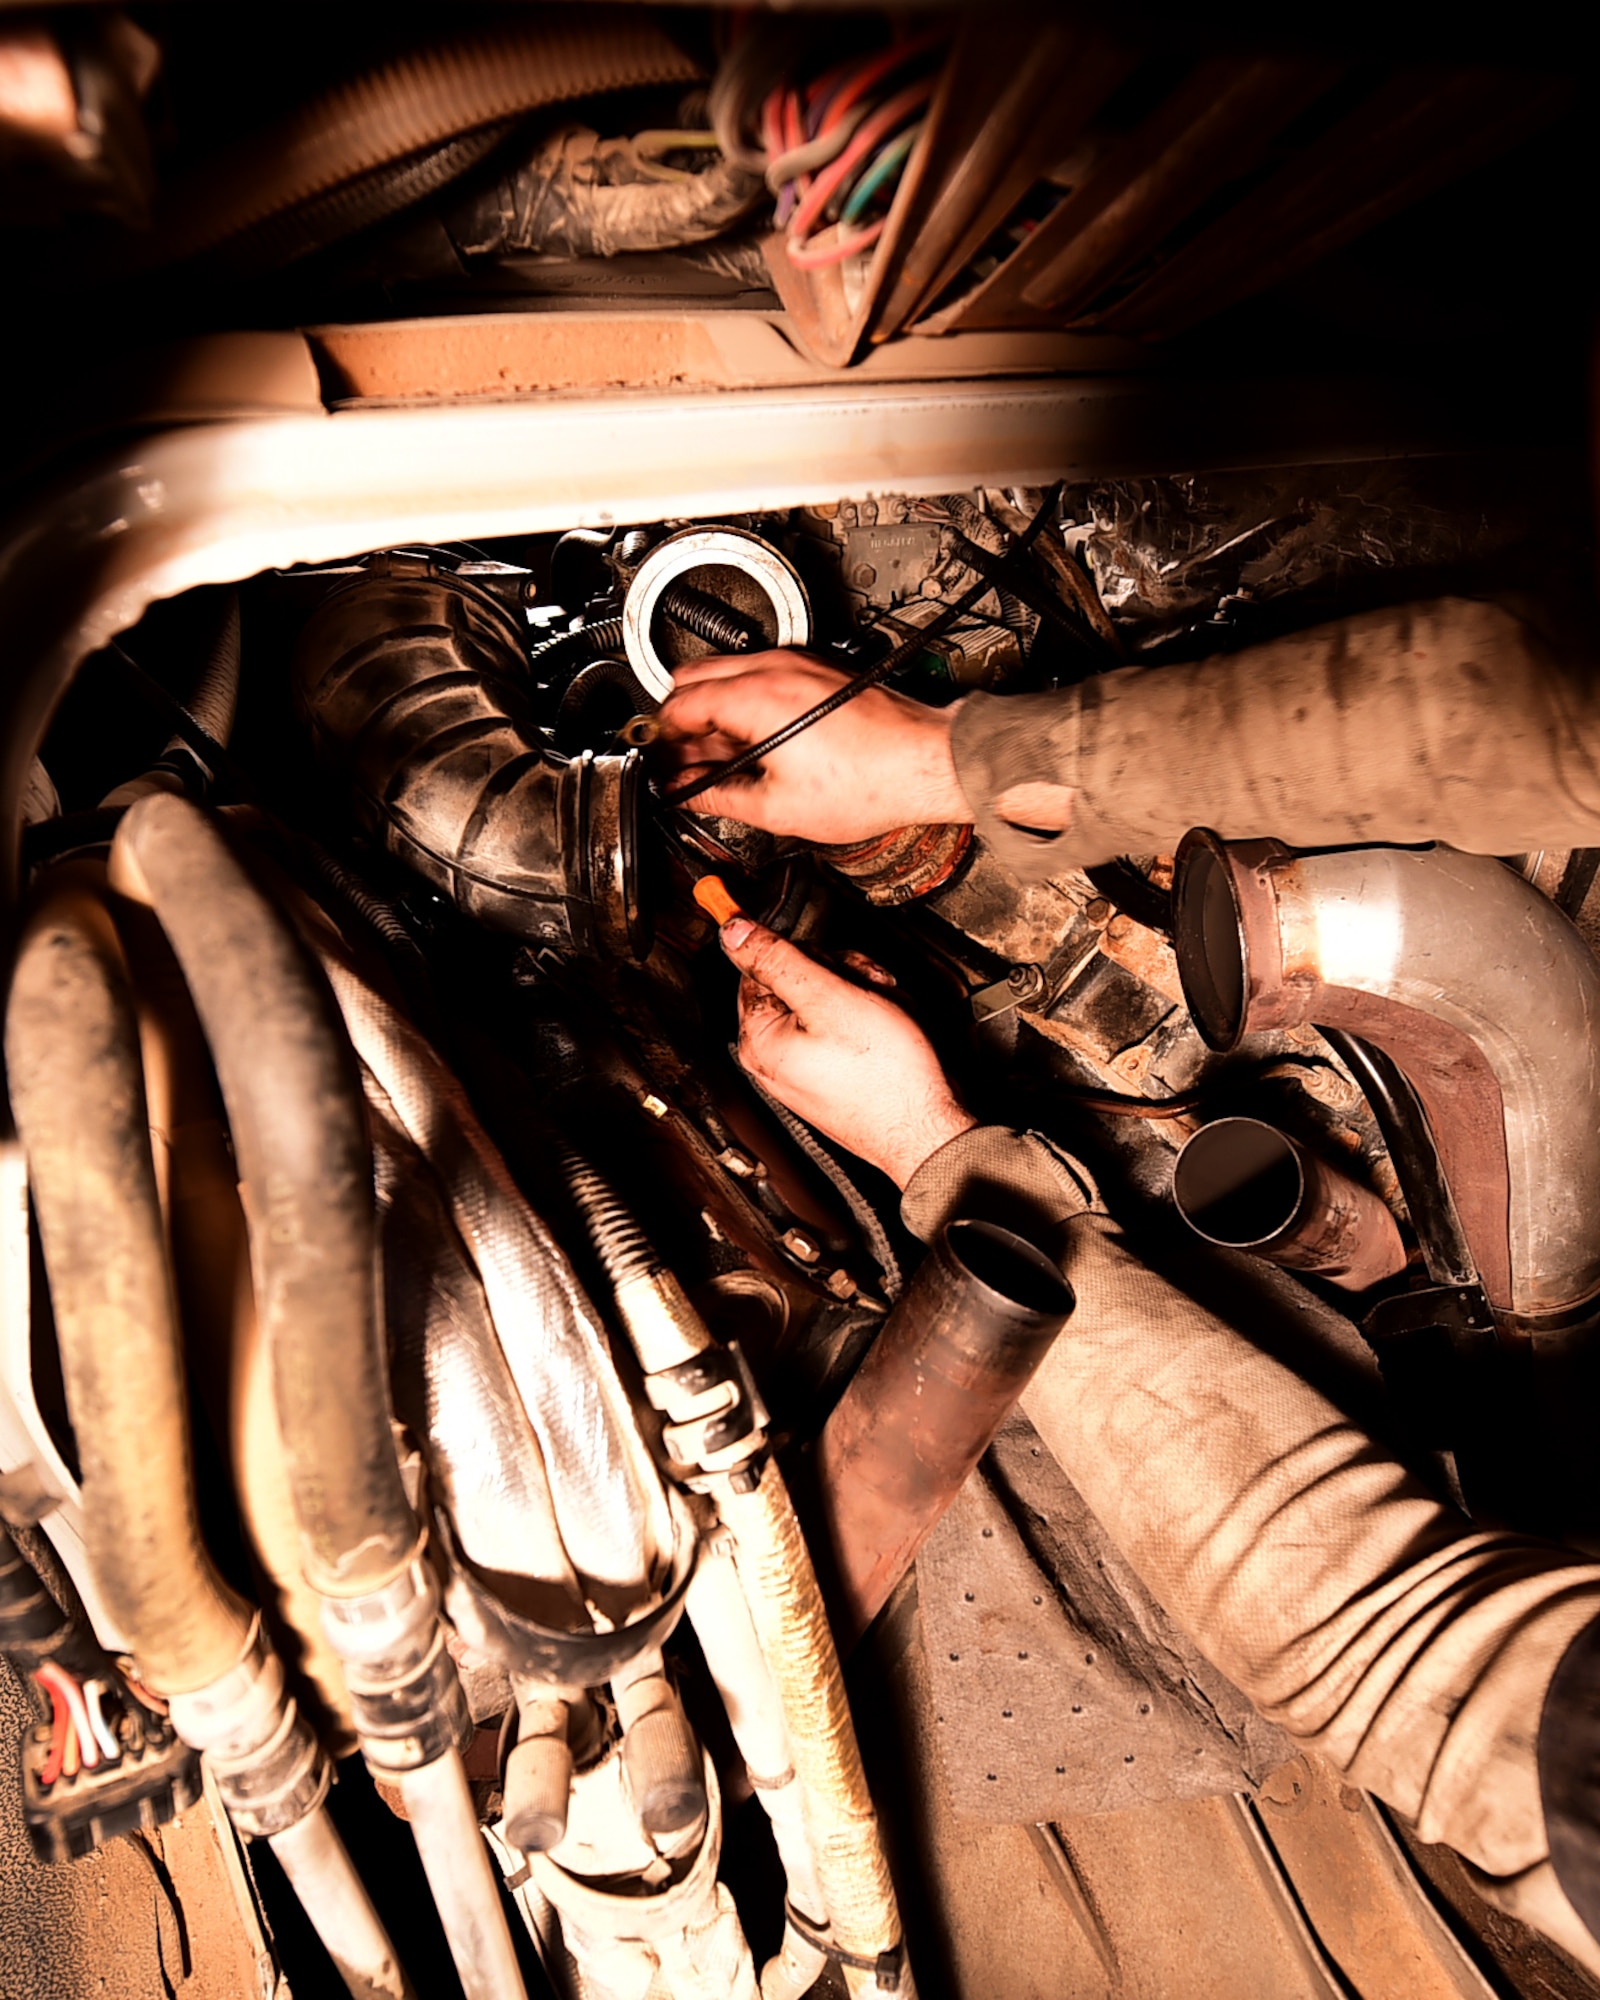 Staff Sgt. Joseph Petrie, 386th Vehicle Management Flight, mission generation vehicular equipment maintenance journeyman, replaces a vehicle injection control pump at an undisclosed location in Southwest Asia, Jan. 4, 2016. The vehicle management flight maintains a fleet of more than 700 vehicles including construction equipment and general purpose vehicles supporting Operation INHERENT RESOLVE. (U.S. Air Force photo by Staff Sgt. Jerilyn Quintanilla)